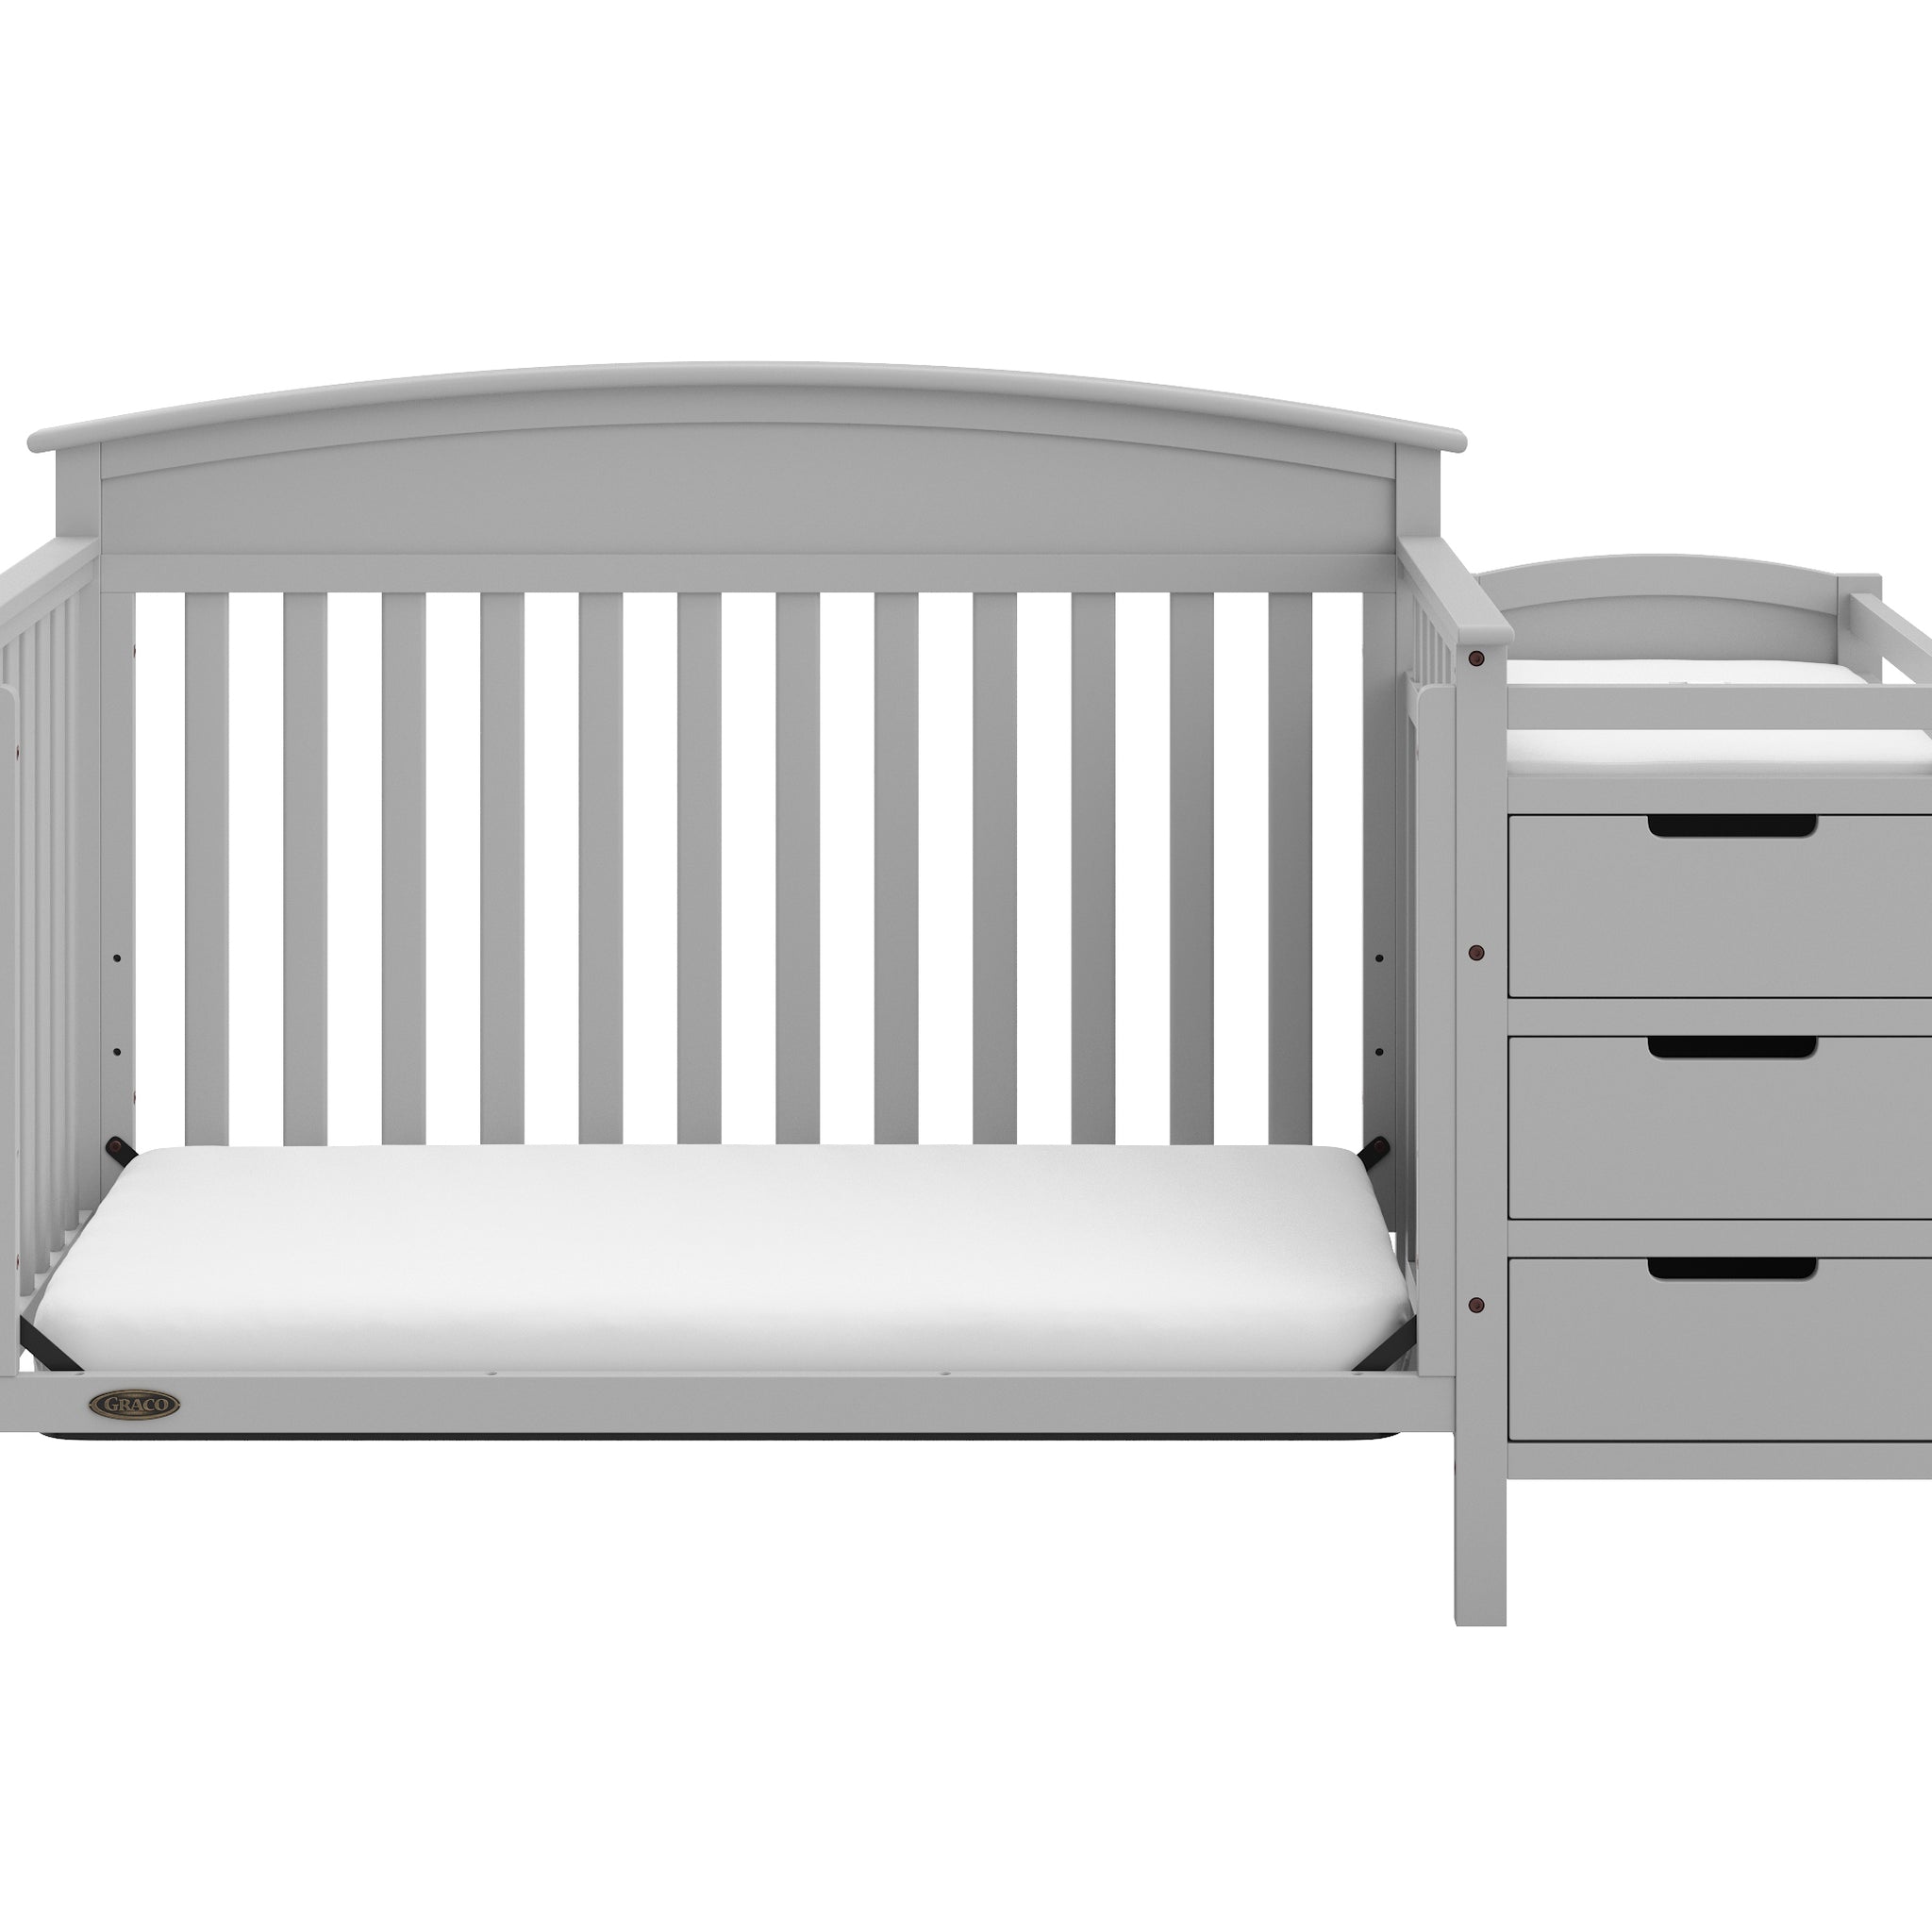 Pebble gray crib and changer in toddler bed conversion